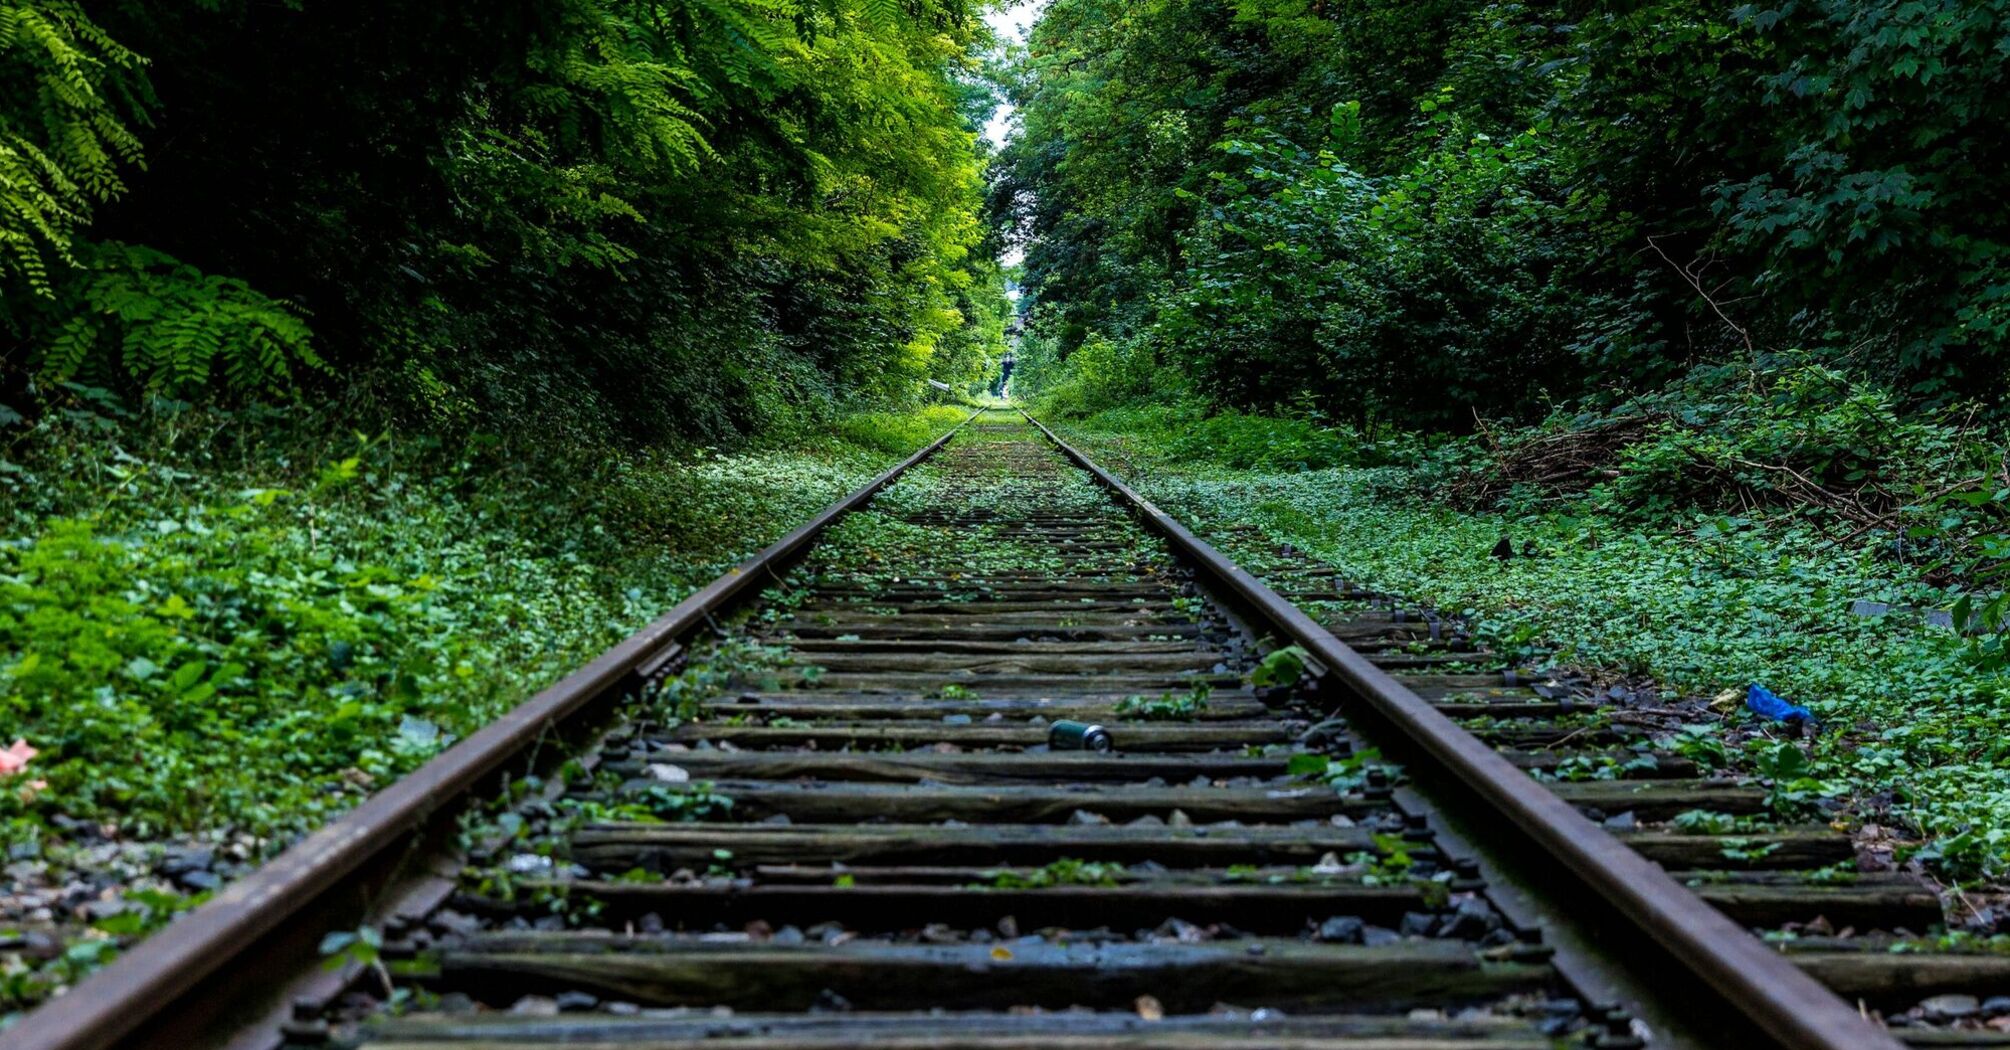 Railroad tracks running through a densely forested area